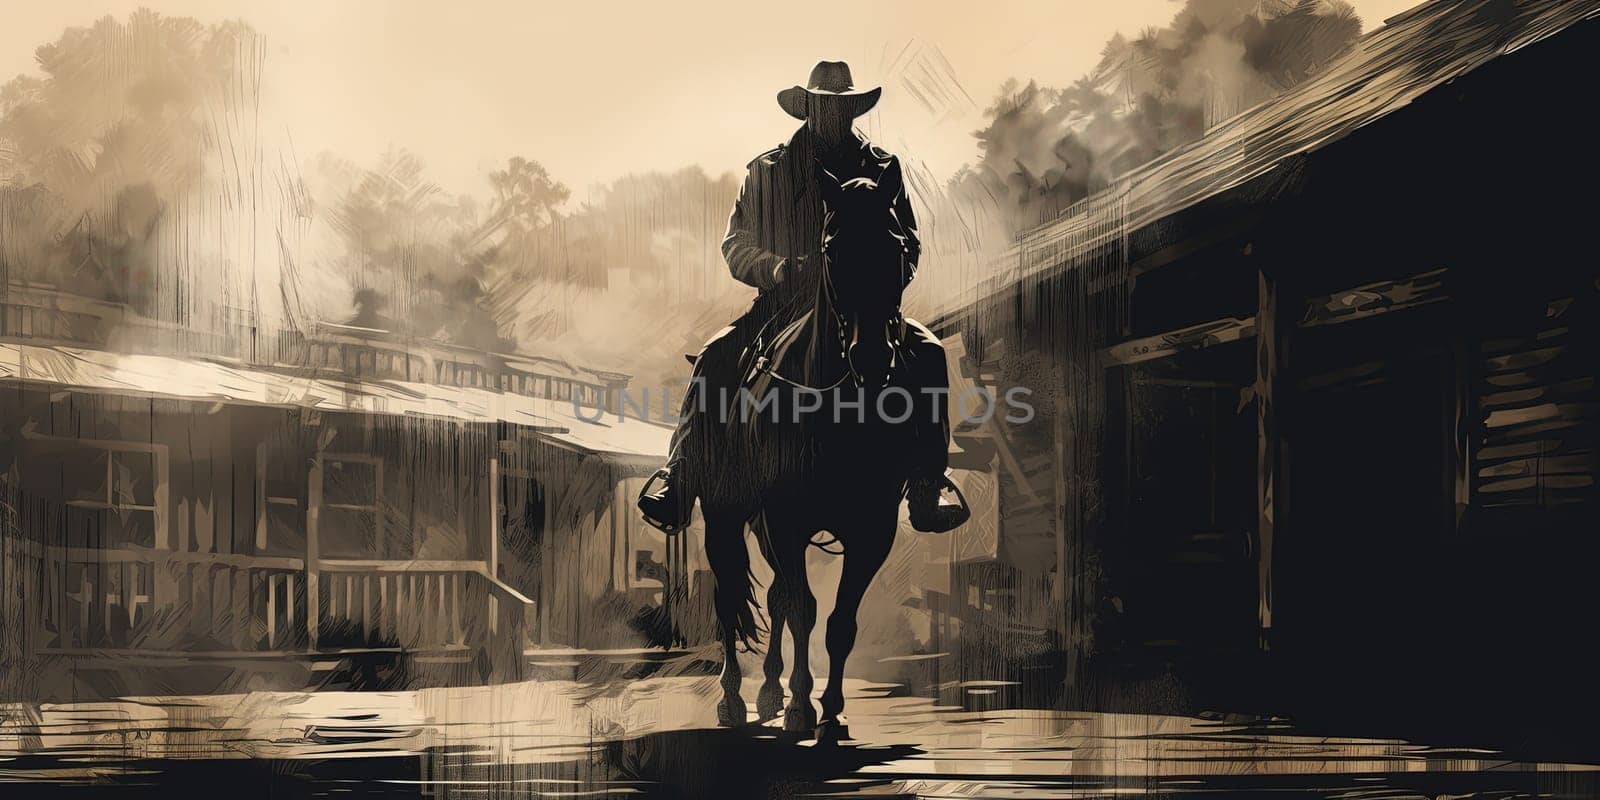 A captivating scene of a cowboy on horseback in vintage Western town